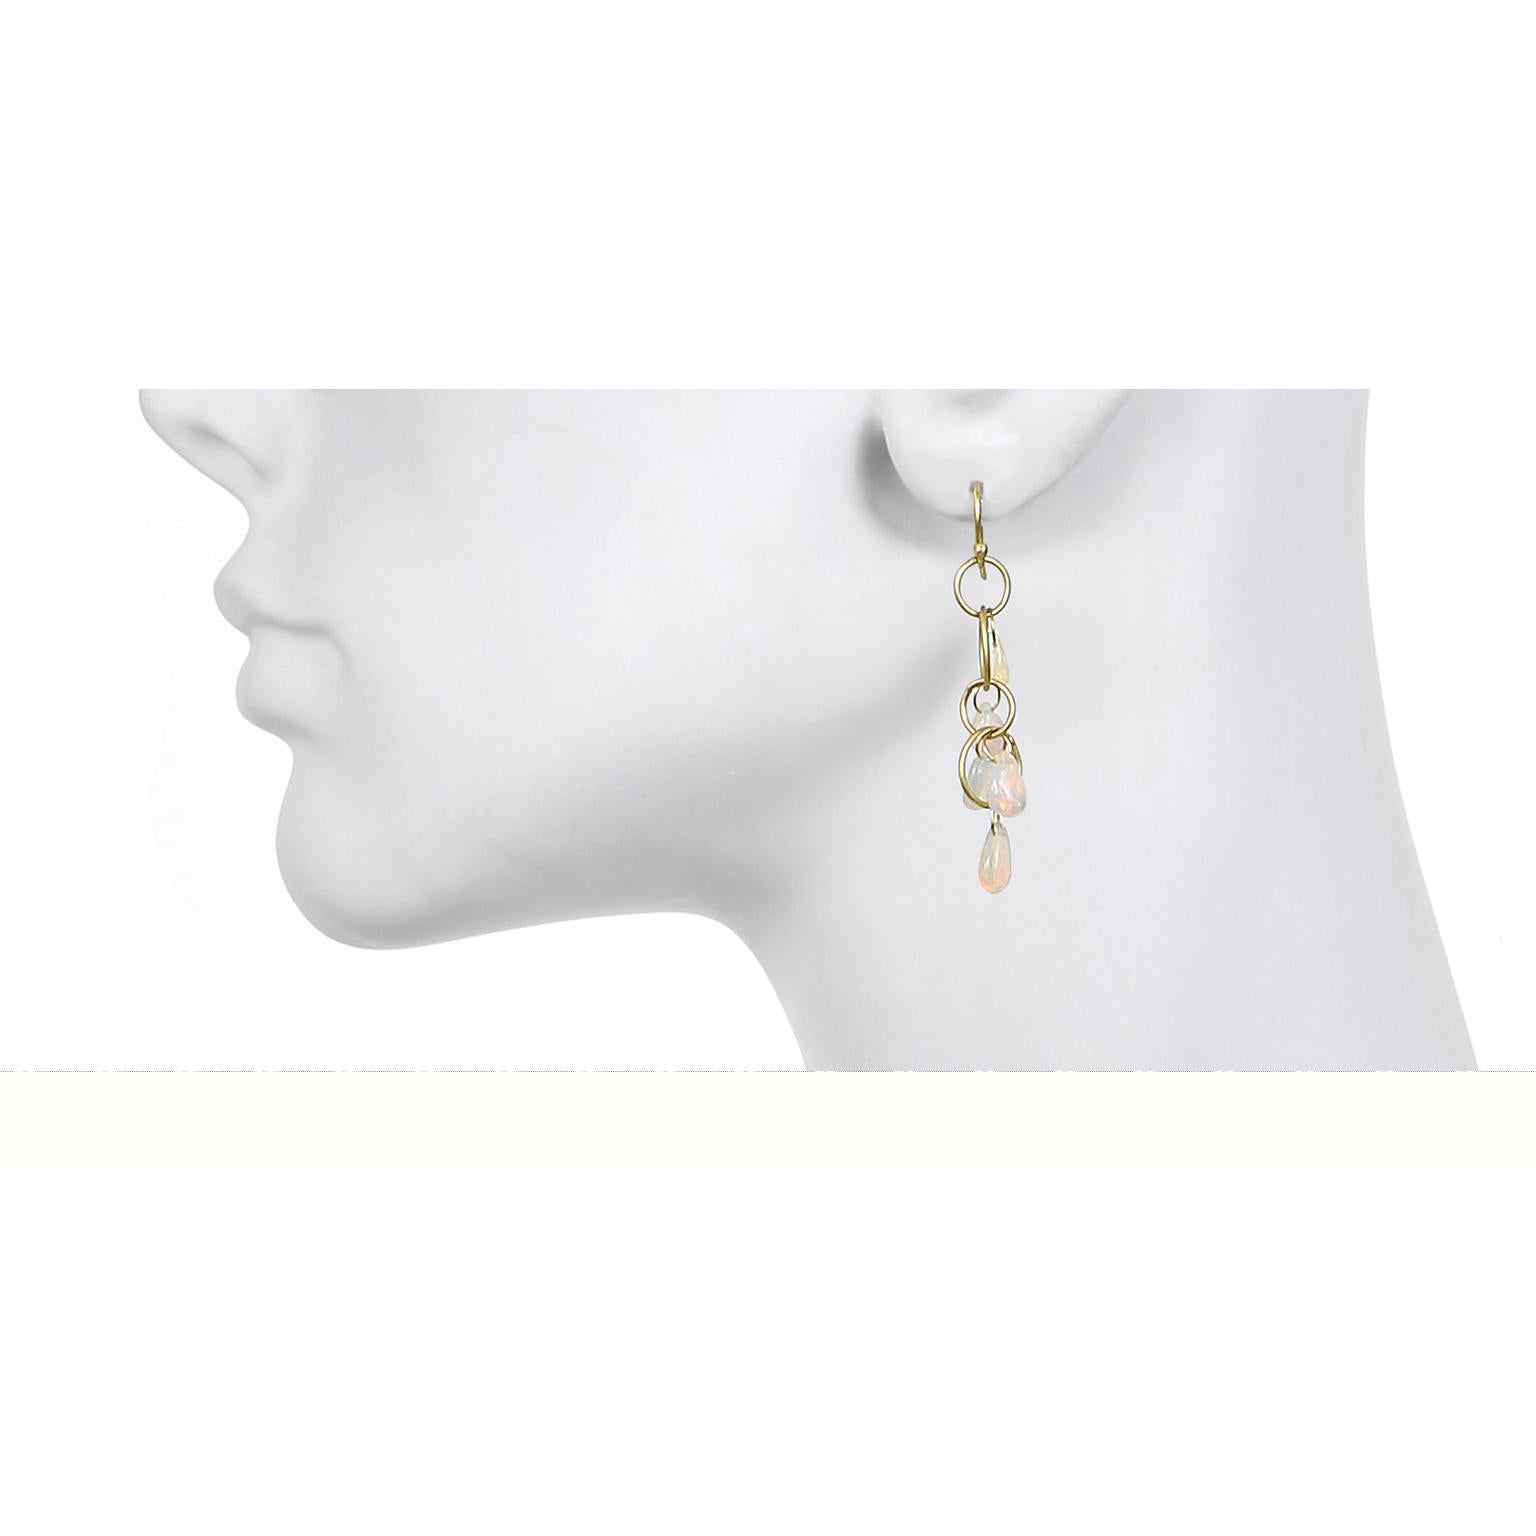 A perennial favorite!  Earrings in 18k gold featuring planished rings and opal briolettes. Fun, versatile, and lightweight, these earrings with their magical iridescent glow can easily shift from workweek to weekend in a snap.

